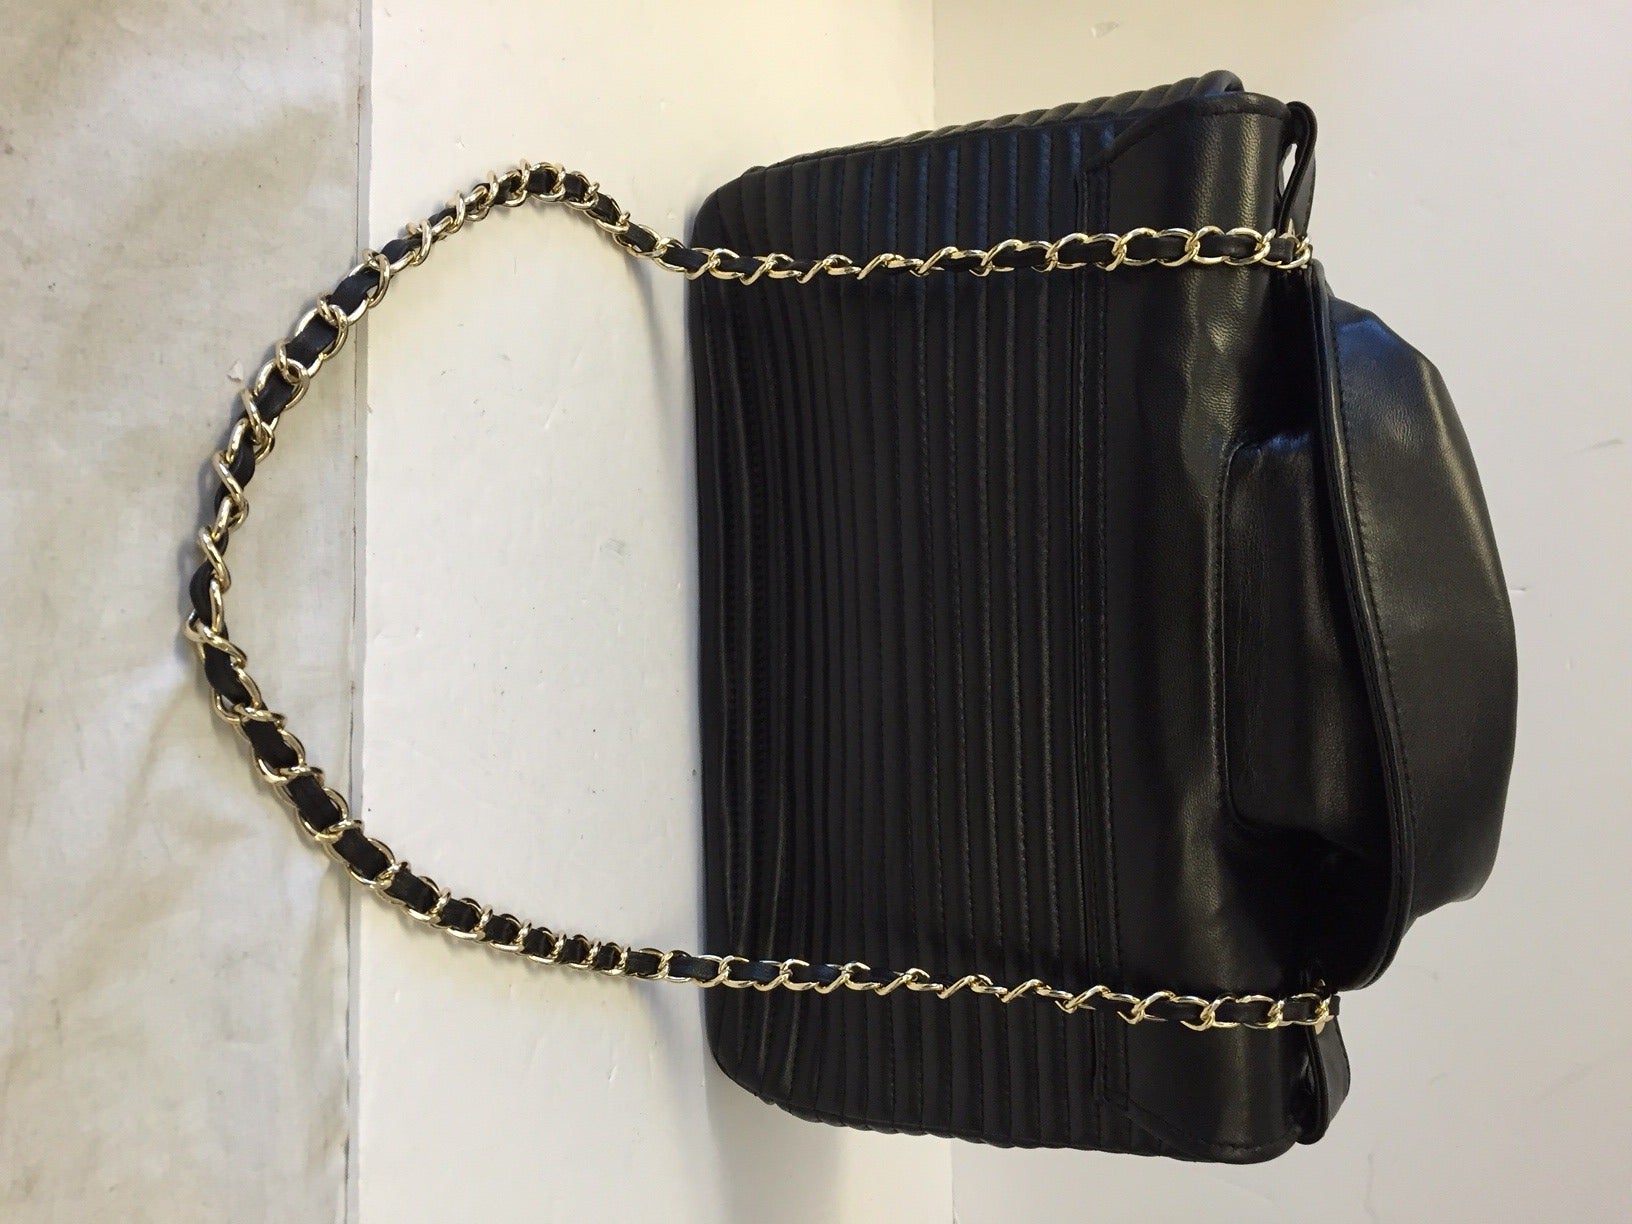 2014 Moschino Moto Jacket Shoulder Bag In New Condition For Sale In Westmount, Quebec